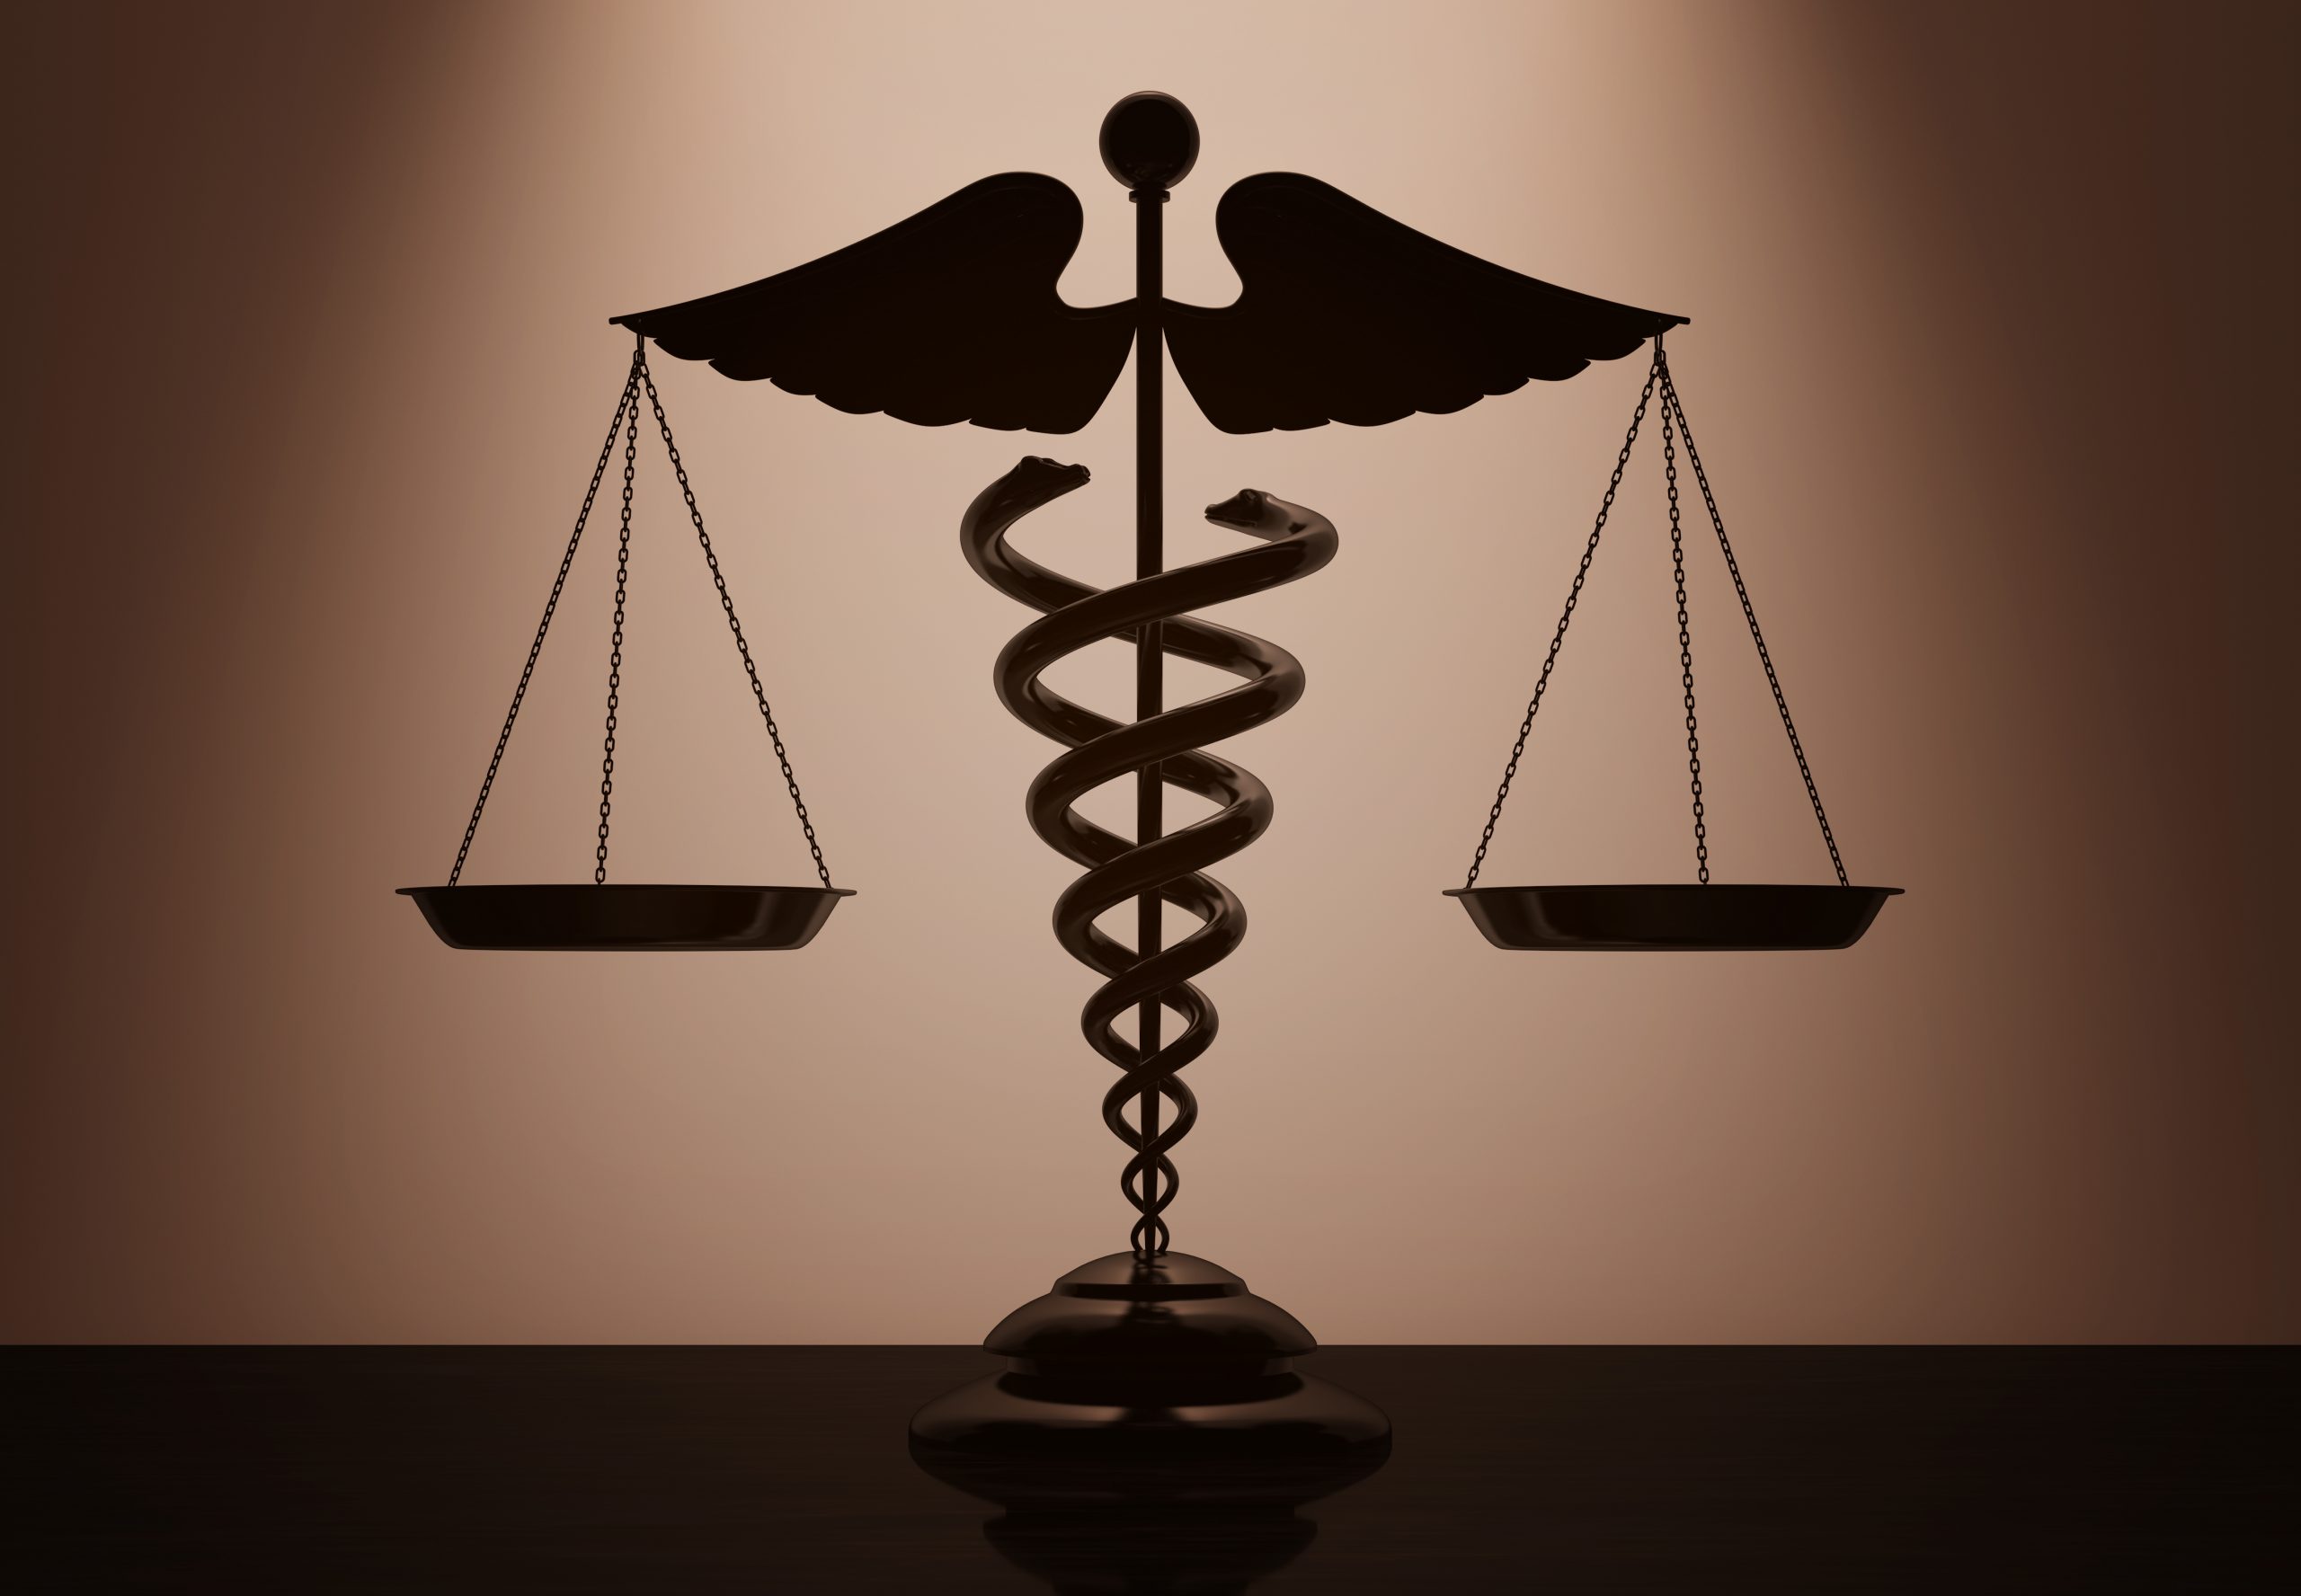 Medical,Caduceus,Symbol,As,Scales,With,Backlight,Over,Wall,In